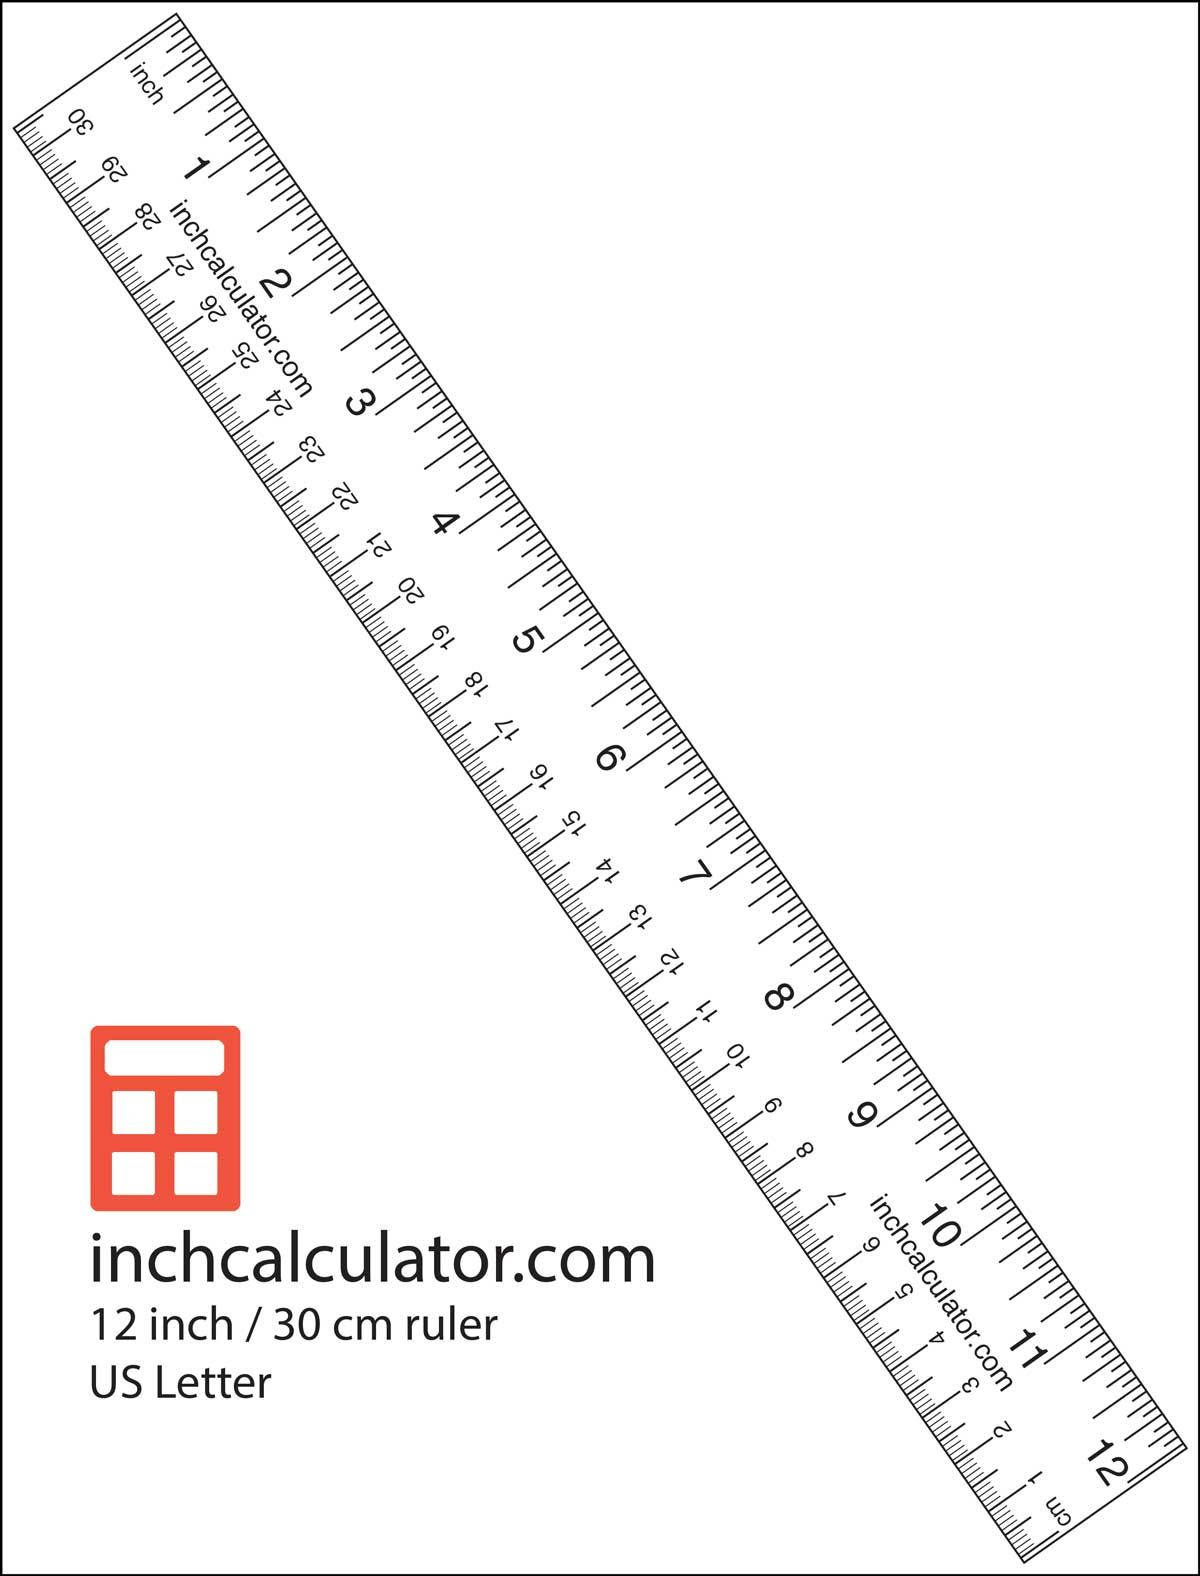 1 32 Scale Ruler Printable | Printable Ruler Actual Size